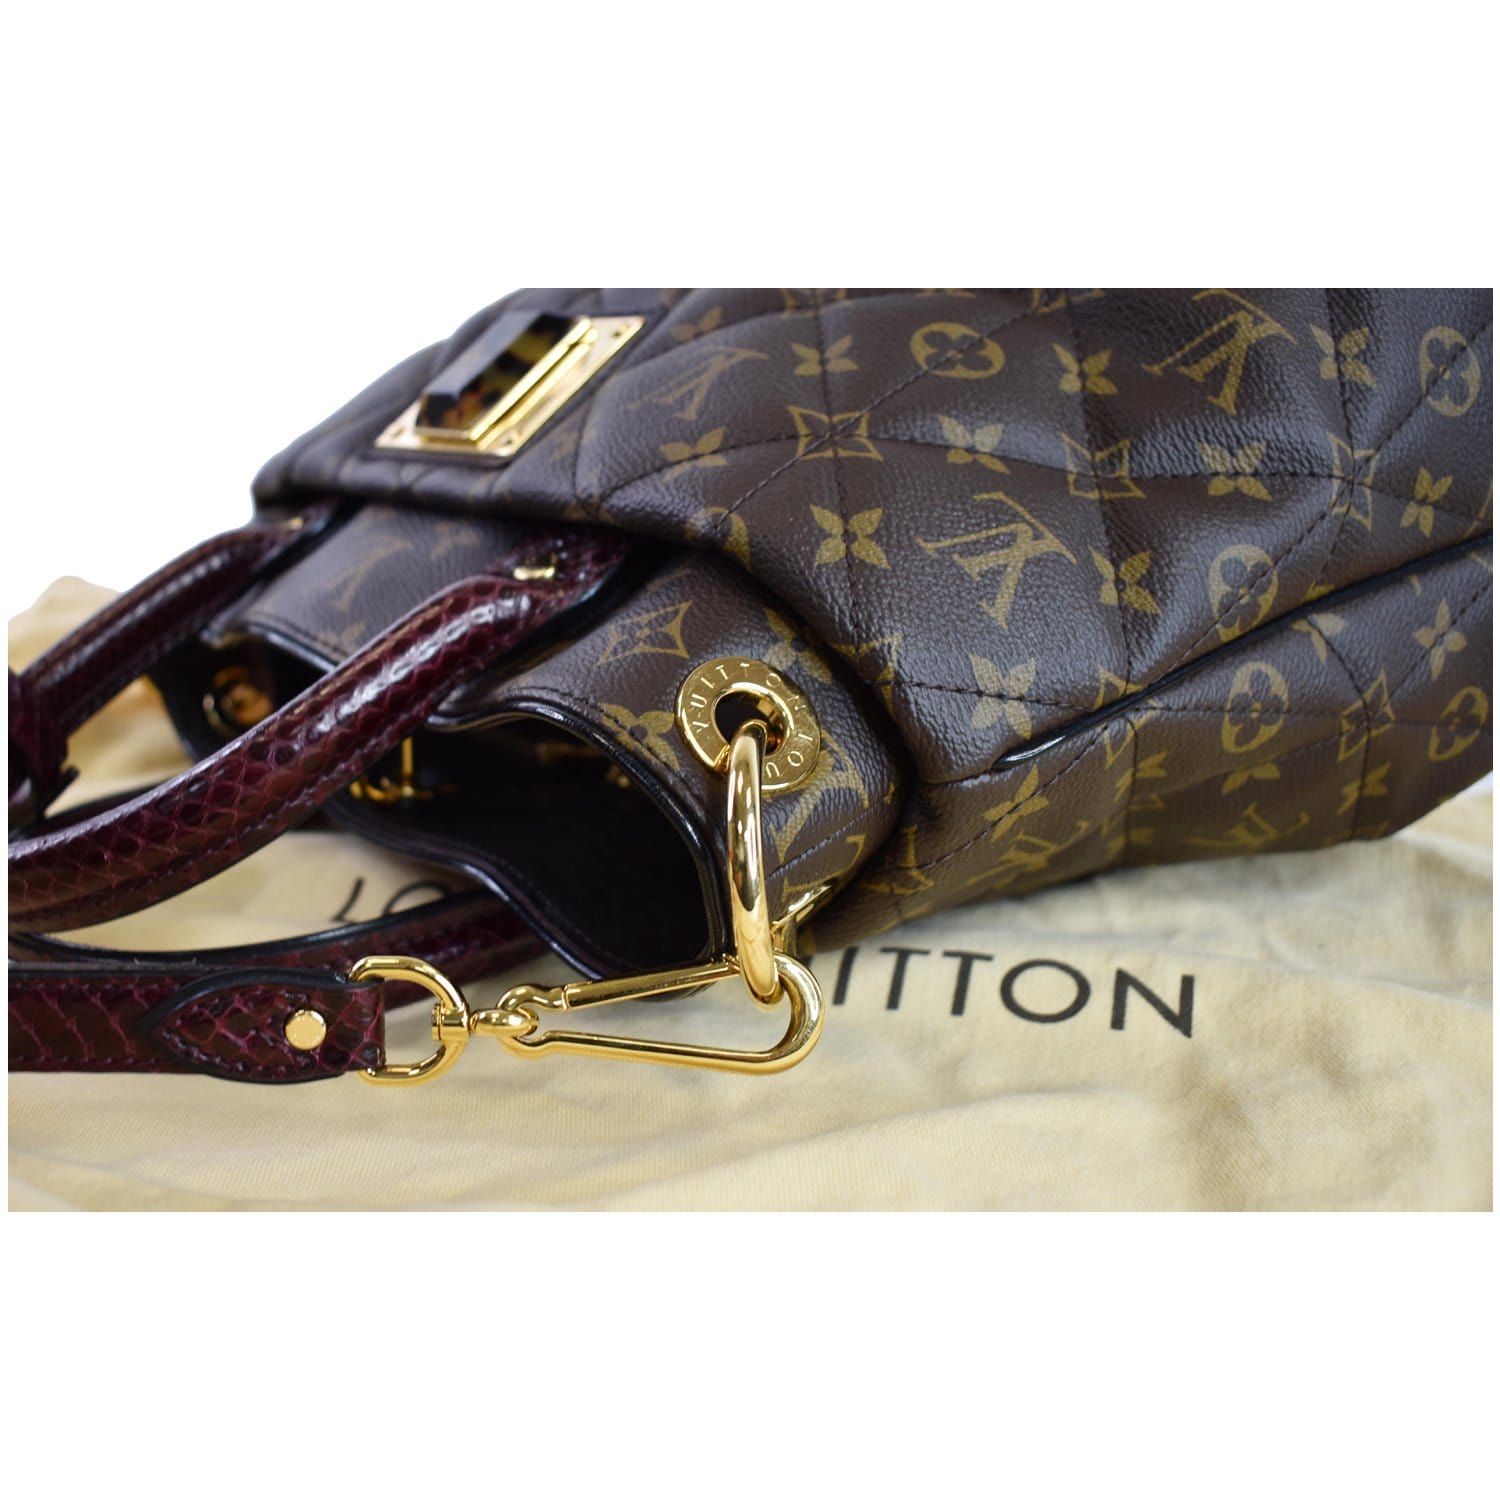 Louis Vuitton Etoile GM Quilted Leather LV Wallet LV-1104P-0009